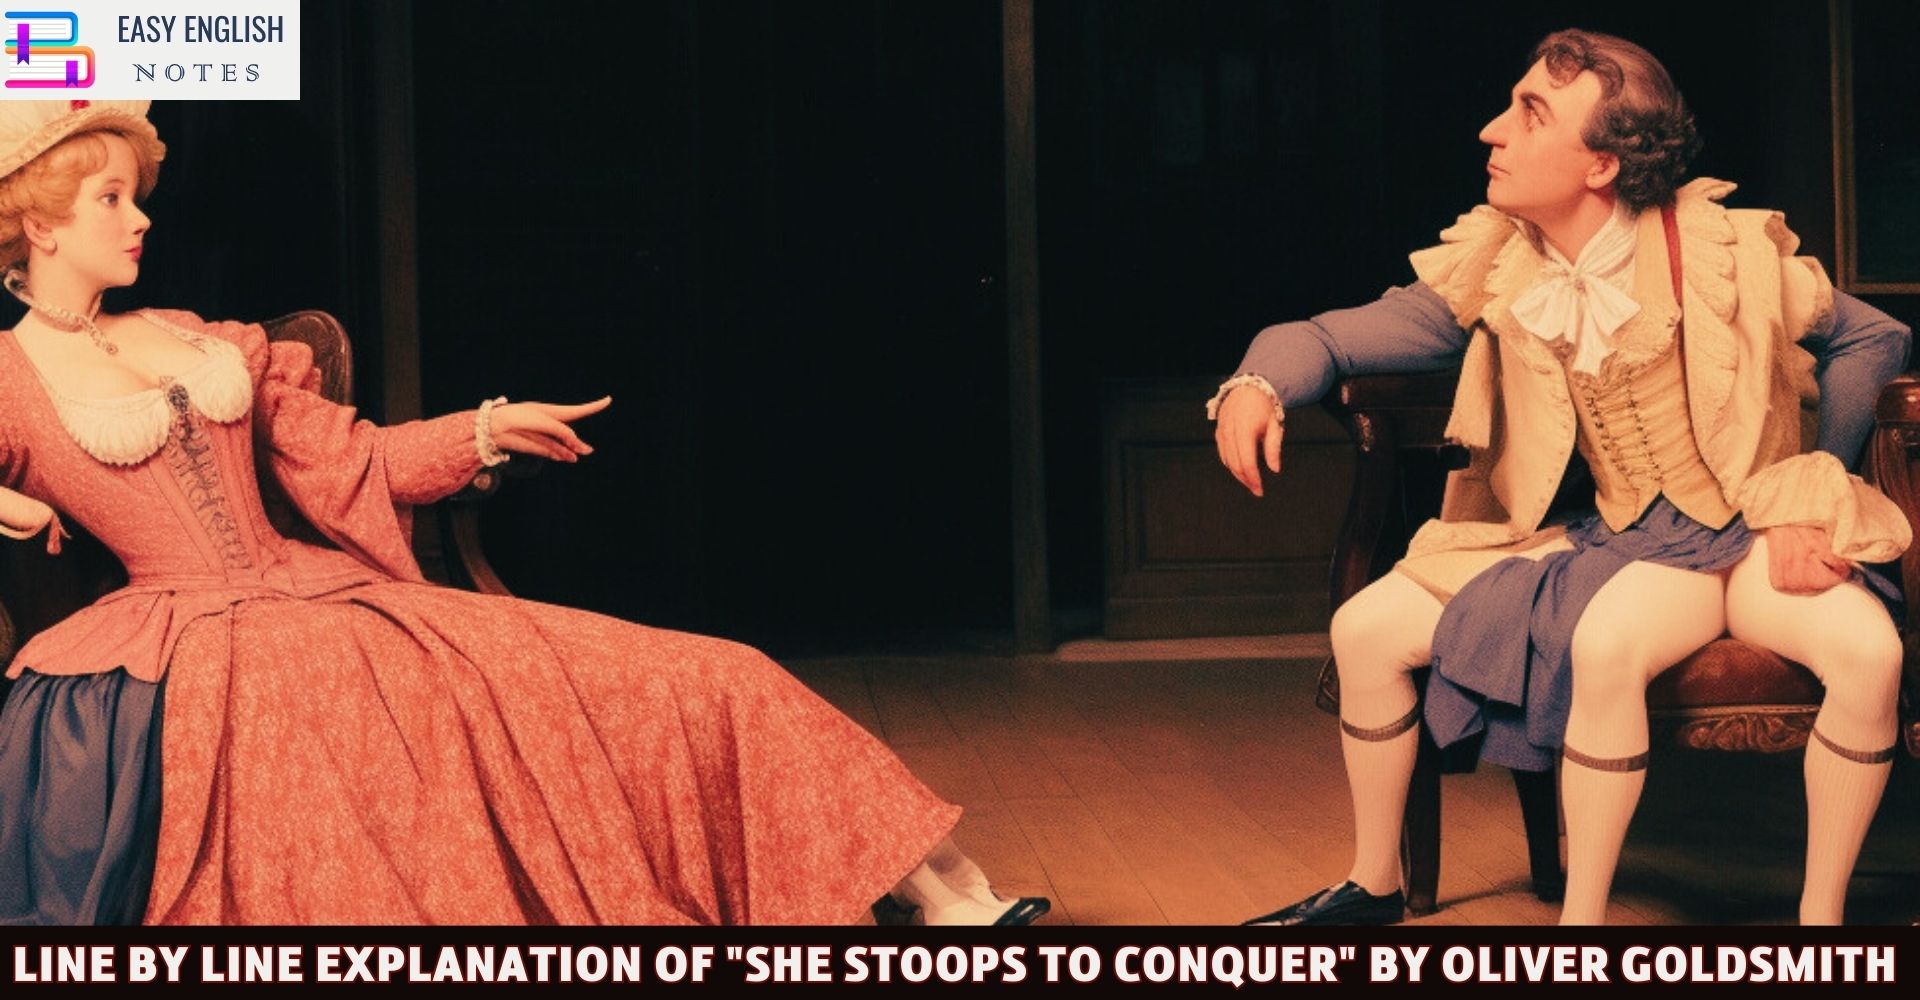 Line By Line Explanation Of "She Stoops to Conquer" By Oliver Goldsmith